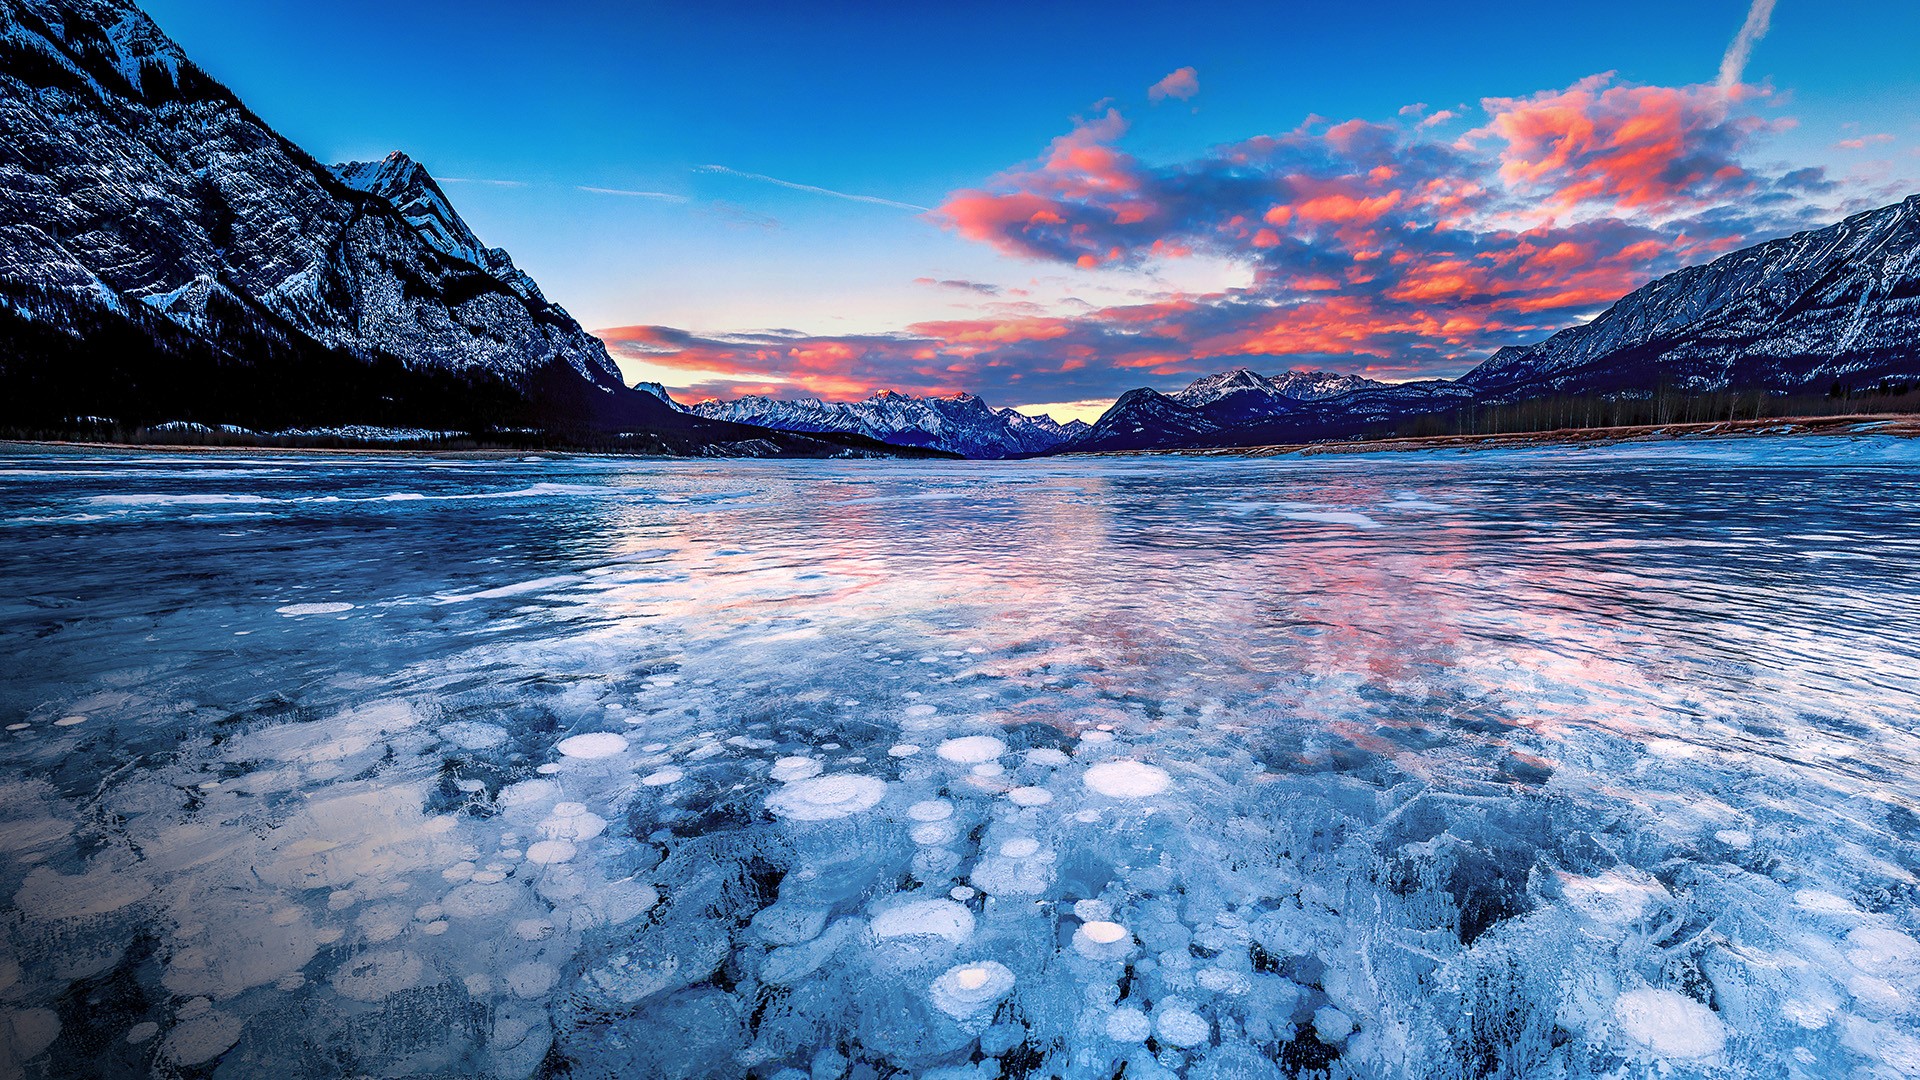 Stacks of methane bubbles under ice in Abraham Lake at sunset, Alberta,  Canada | Windows Spotlight Images